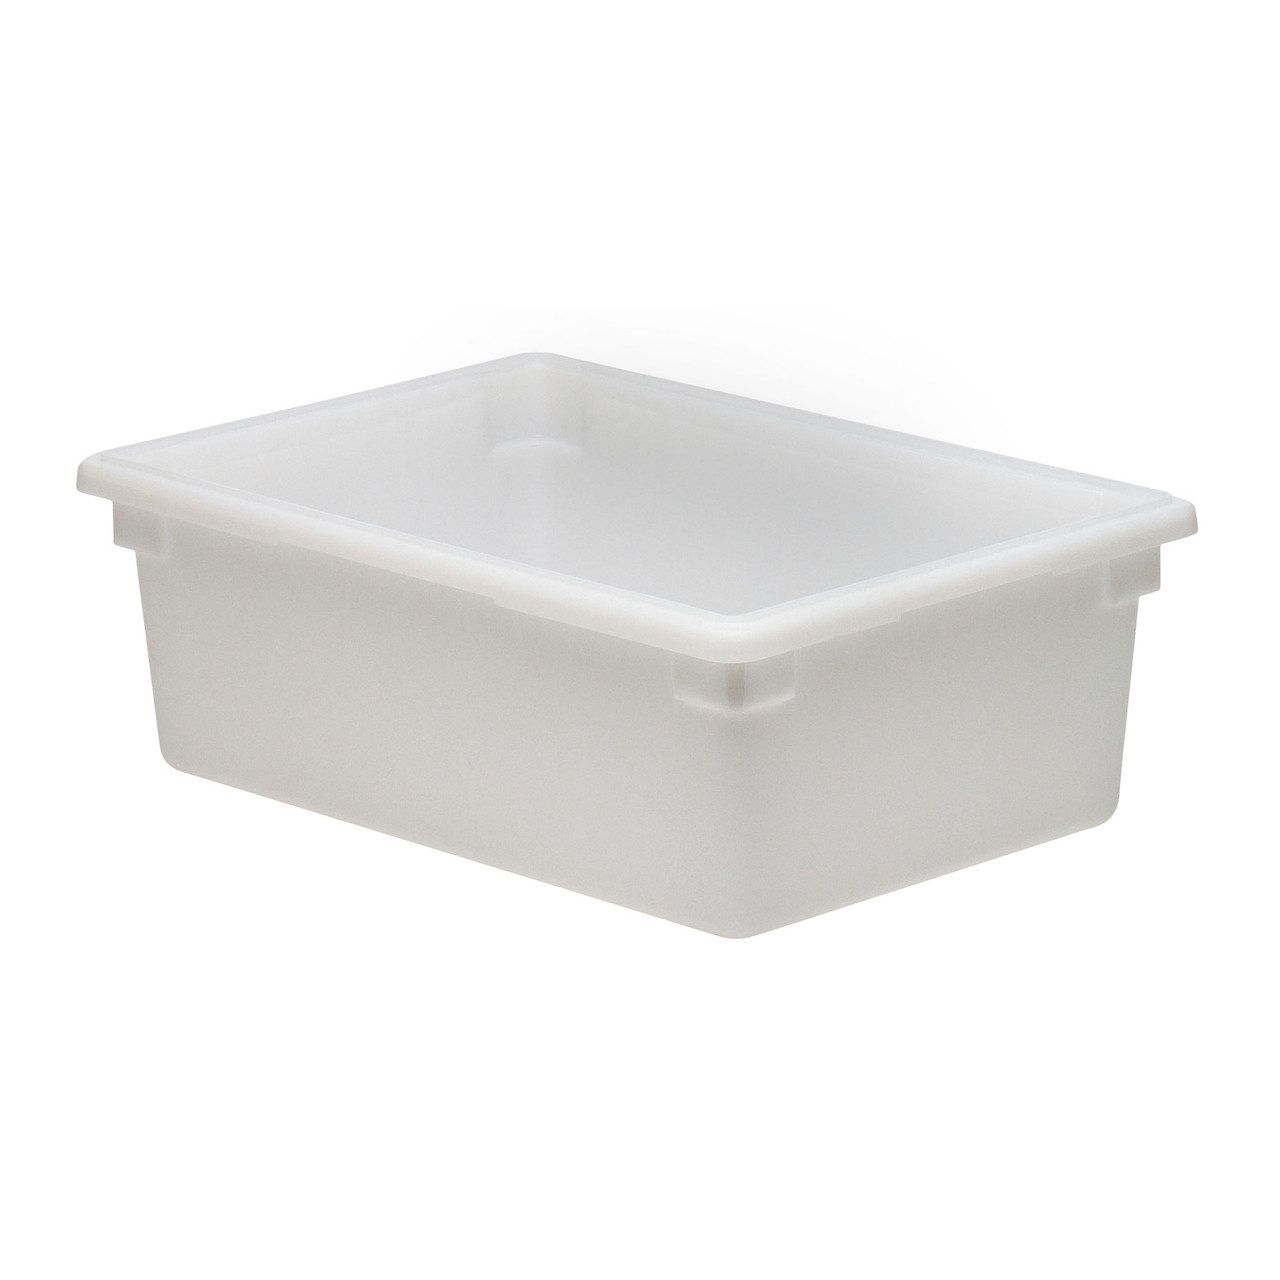 https://cdn11.bigcommerce.com/s-g3i86bef61/images/stencil/1280x1280/products/1786/3195/Cambro-18269P148-Food-Storage-Container__96296.1665595949.jpg?c=1